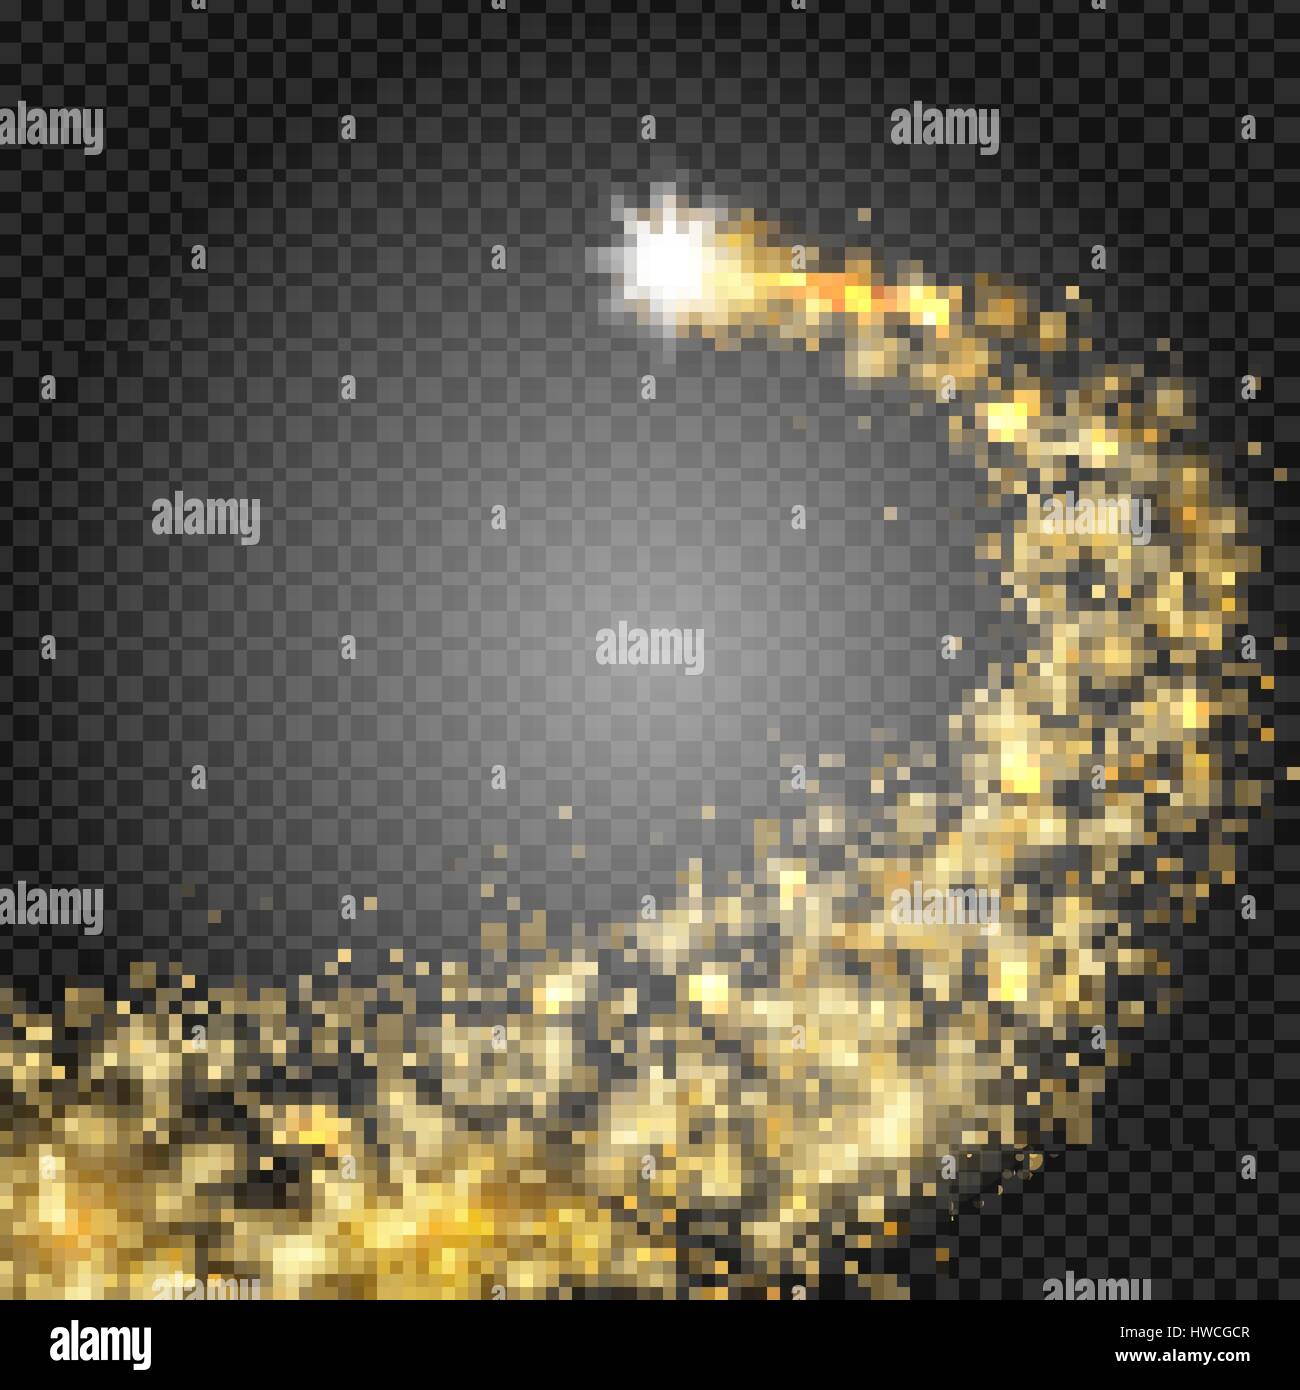 A bright comet with large dust. Falling Star. Really transparent effect. Glow light effect. Golden lights. Vector illustration Stock Vector